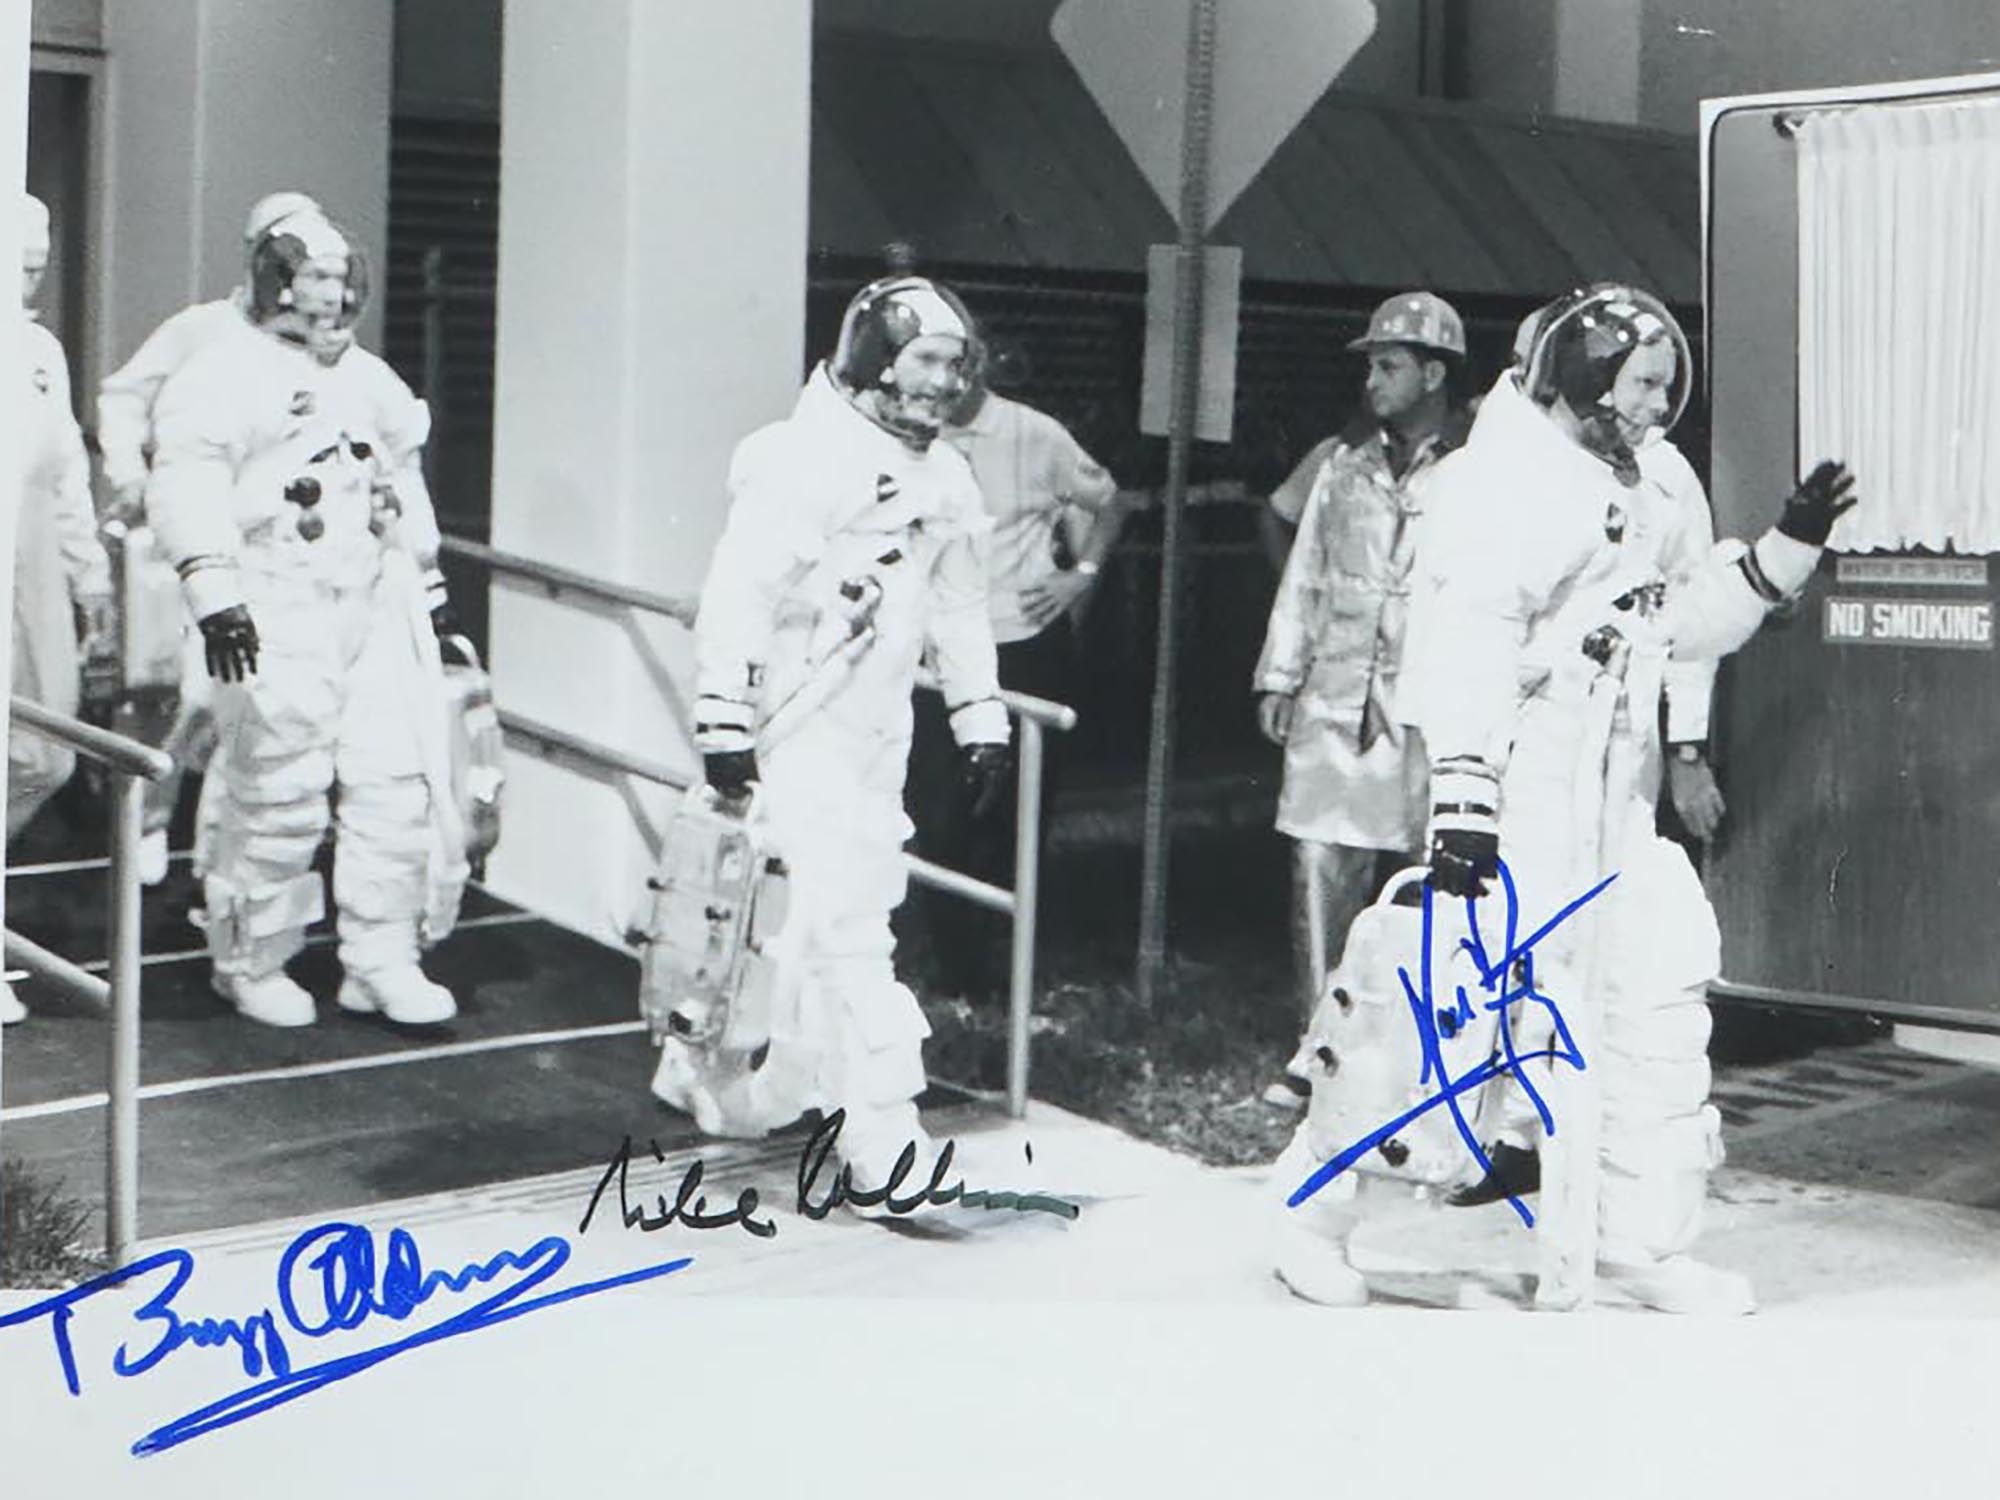 1969 PHOTOGRAPH OF APOLLO 11 CREW WITH AUTOGRAPHS PIC-1